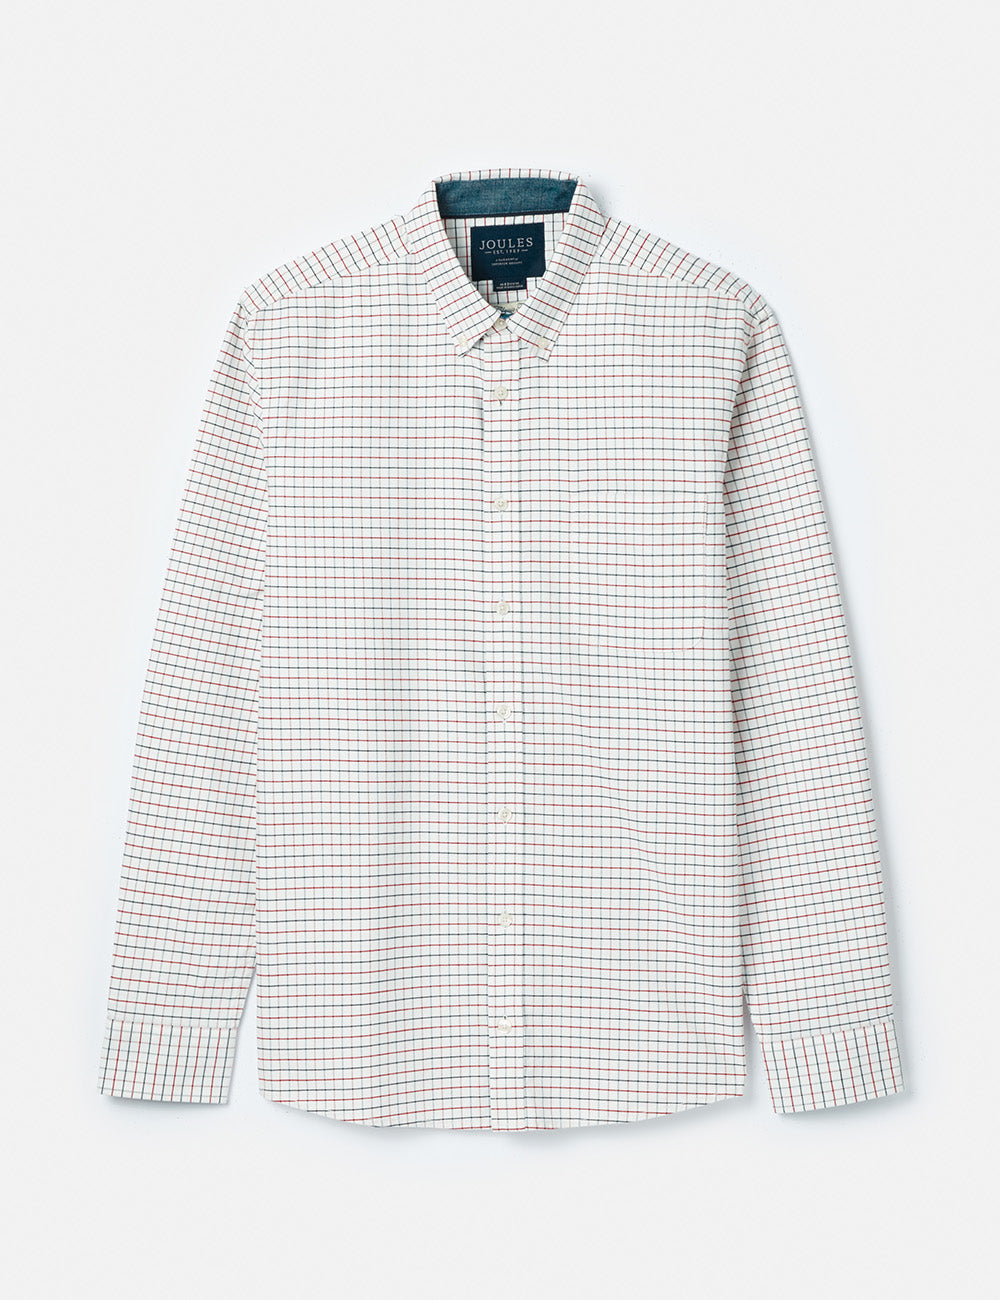 Joules Welford Shirt - Cream/Red Stripe